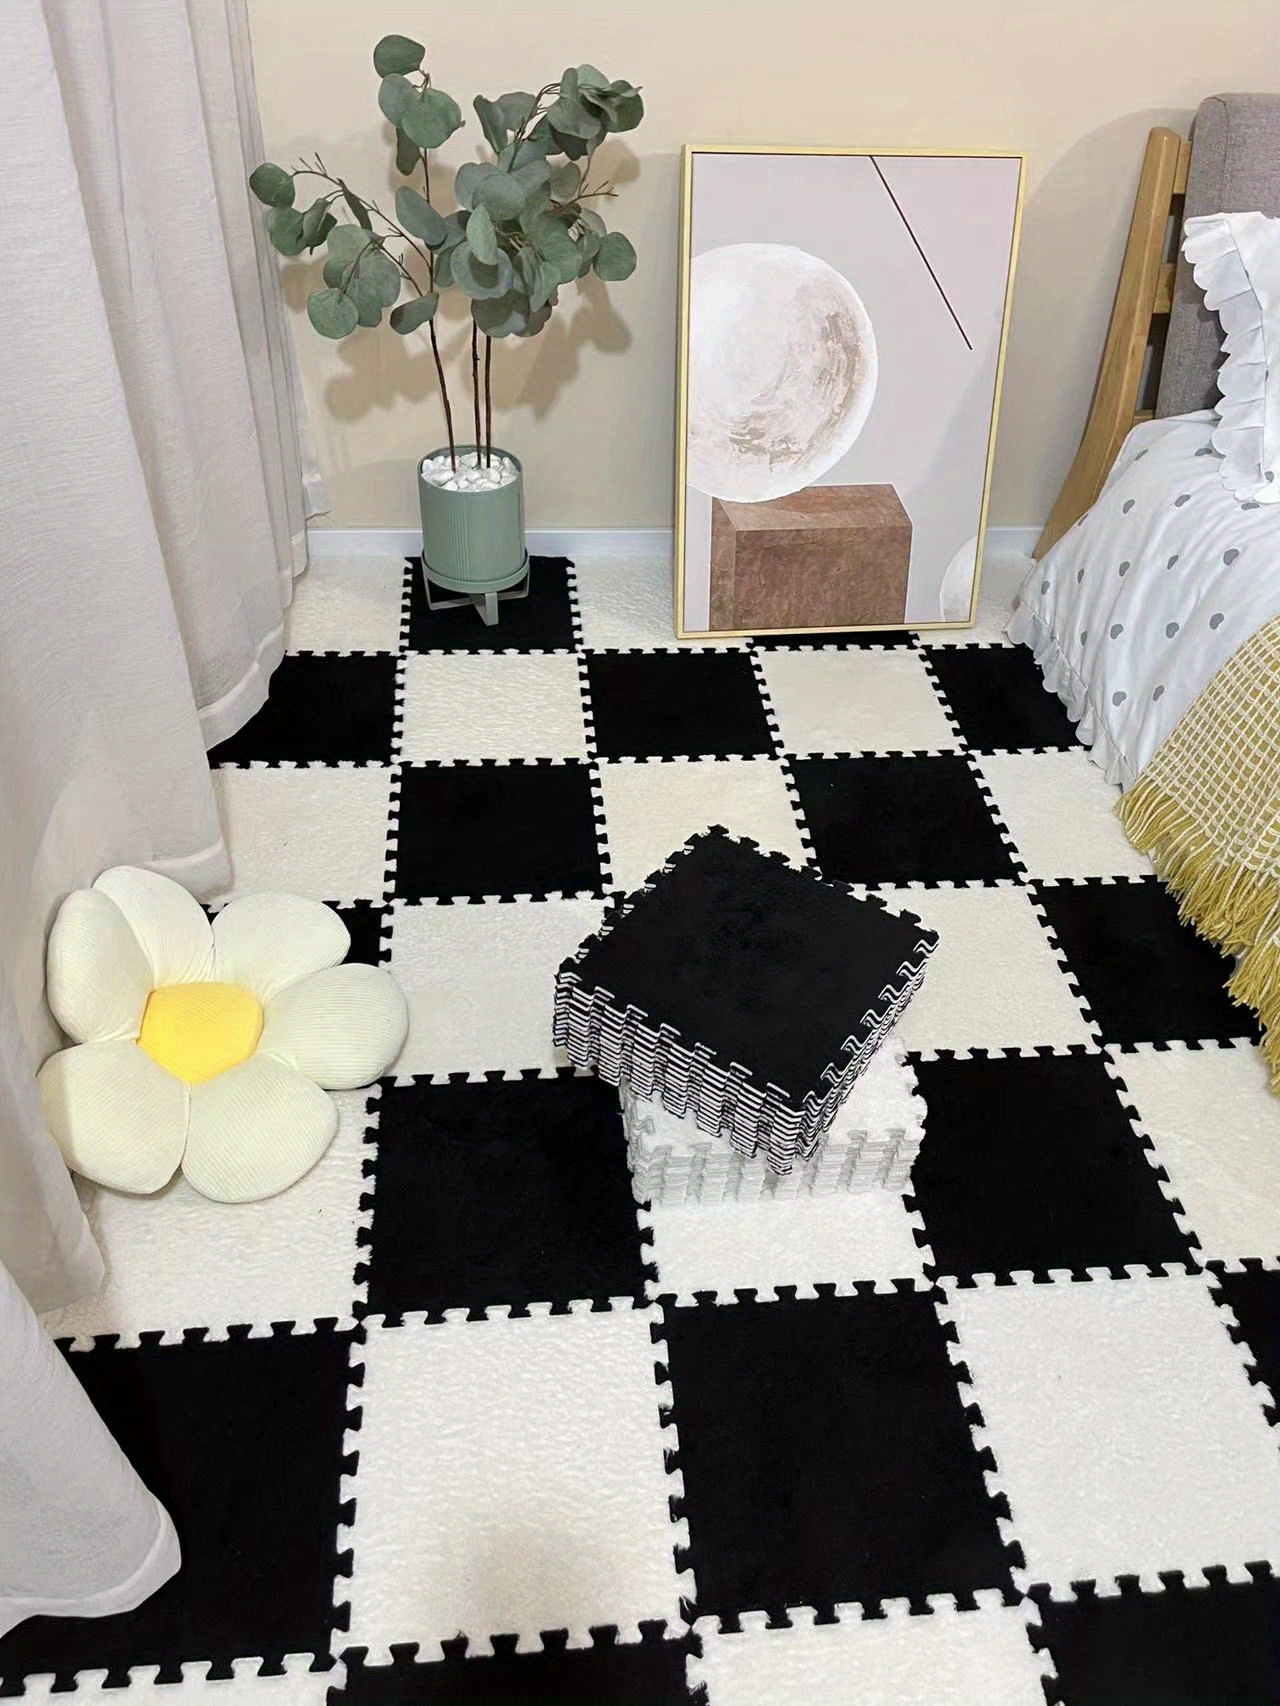 12PCS Plush Puzzle Foam Floor Mat for Kids- Thick Interlocking Fluffy Tiles  with Border Square Rug S…See more 12PCS Plush Puzzle Foam Floor Mat for